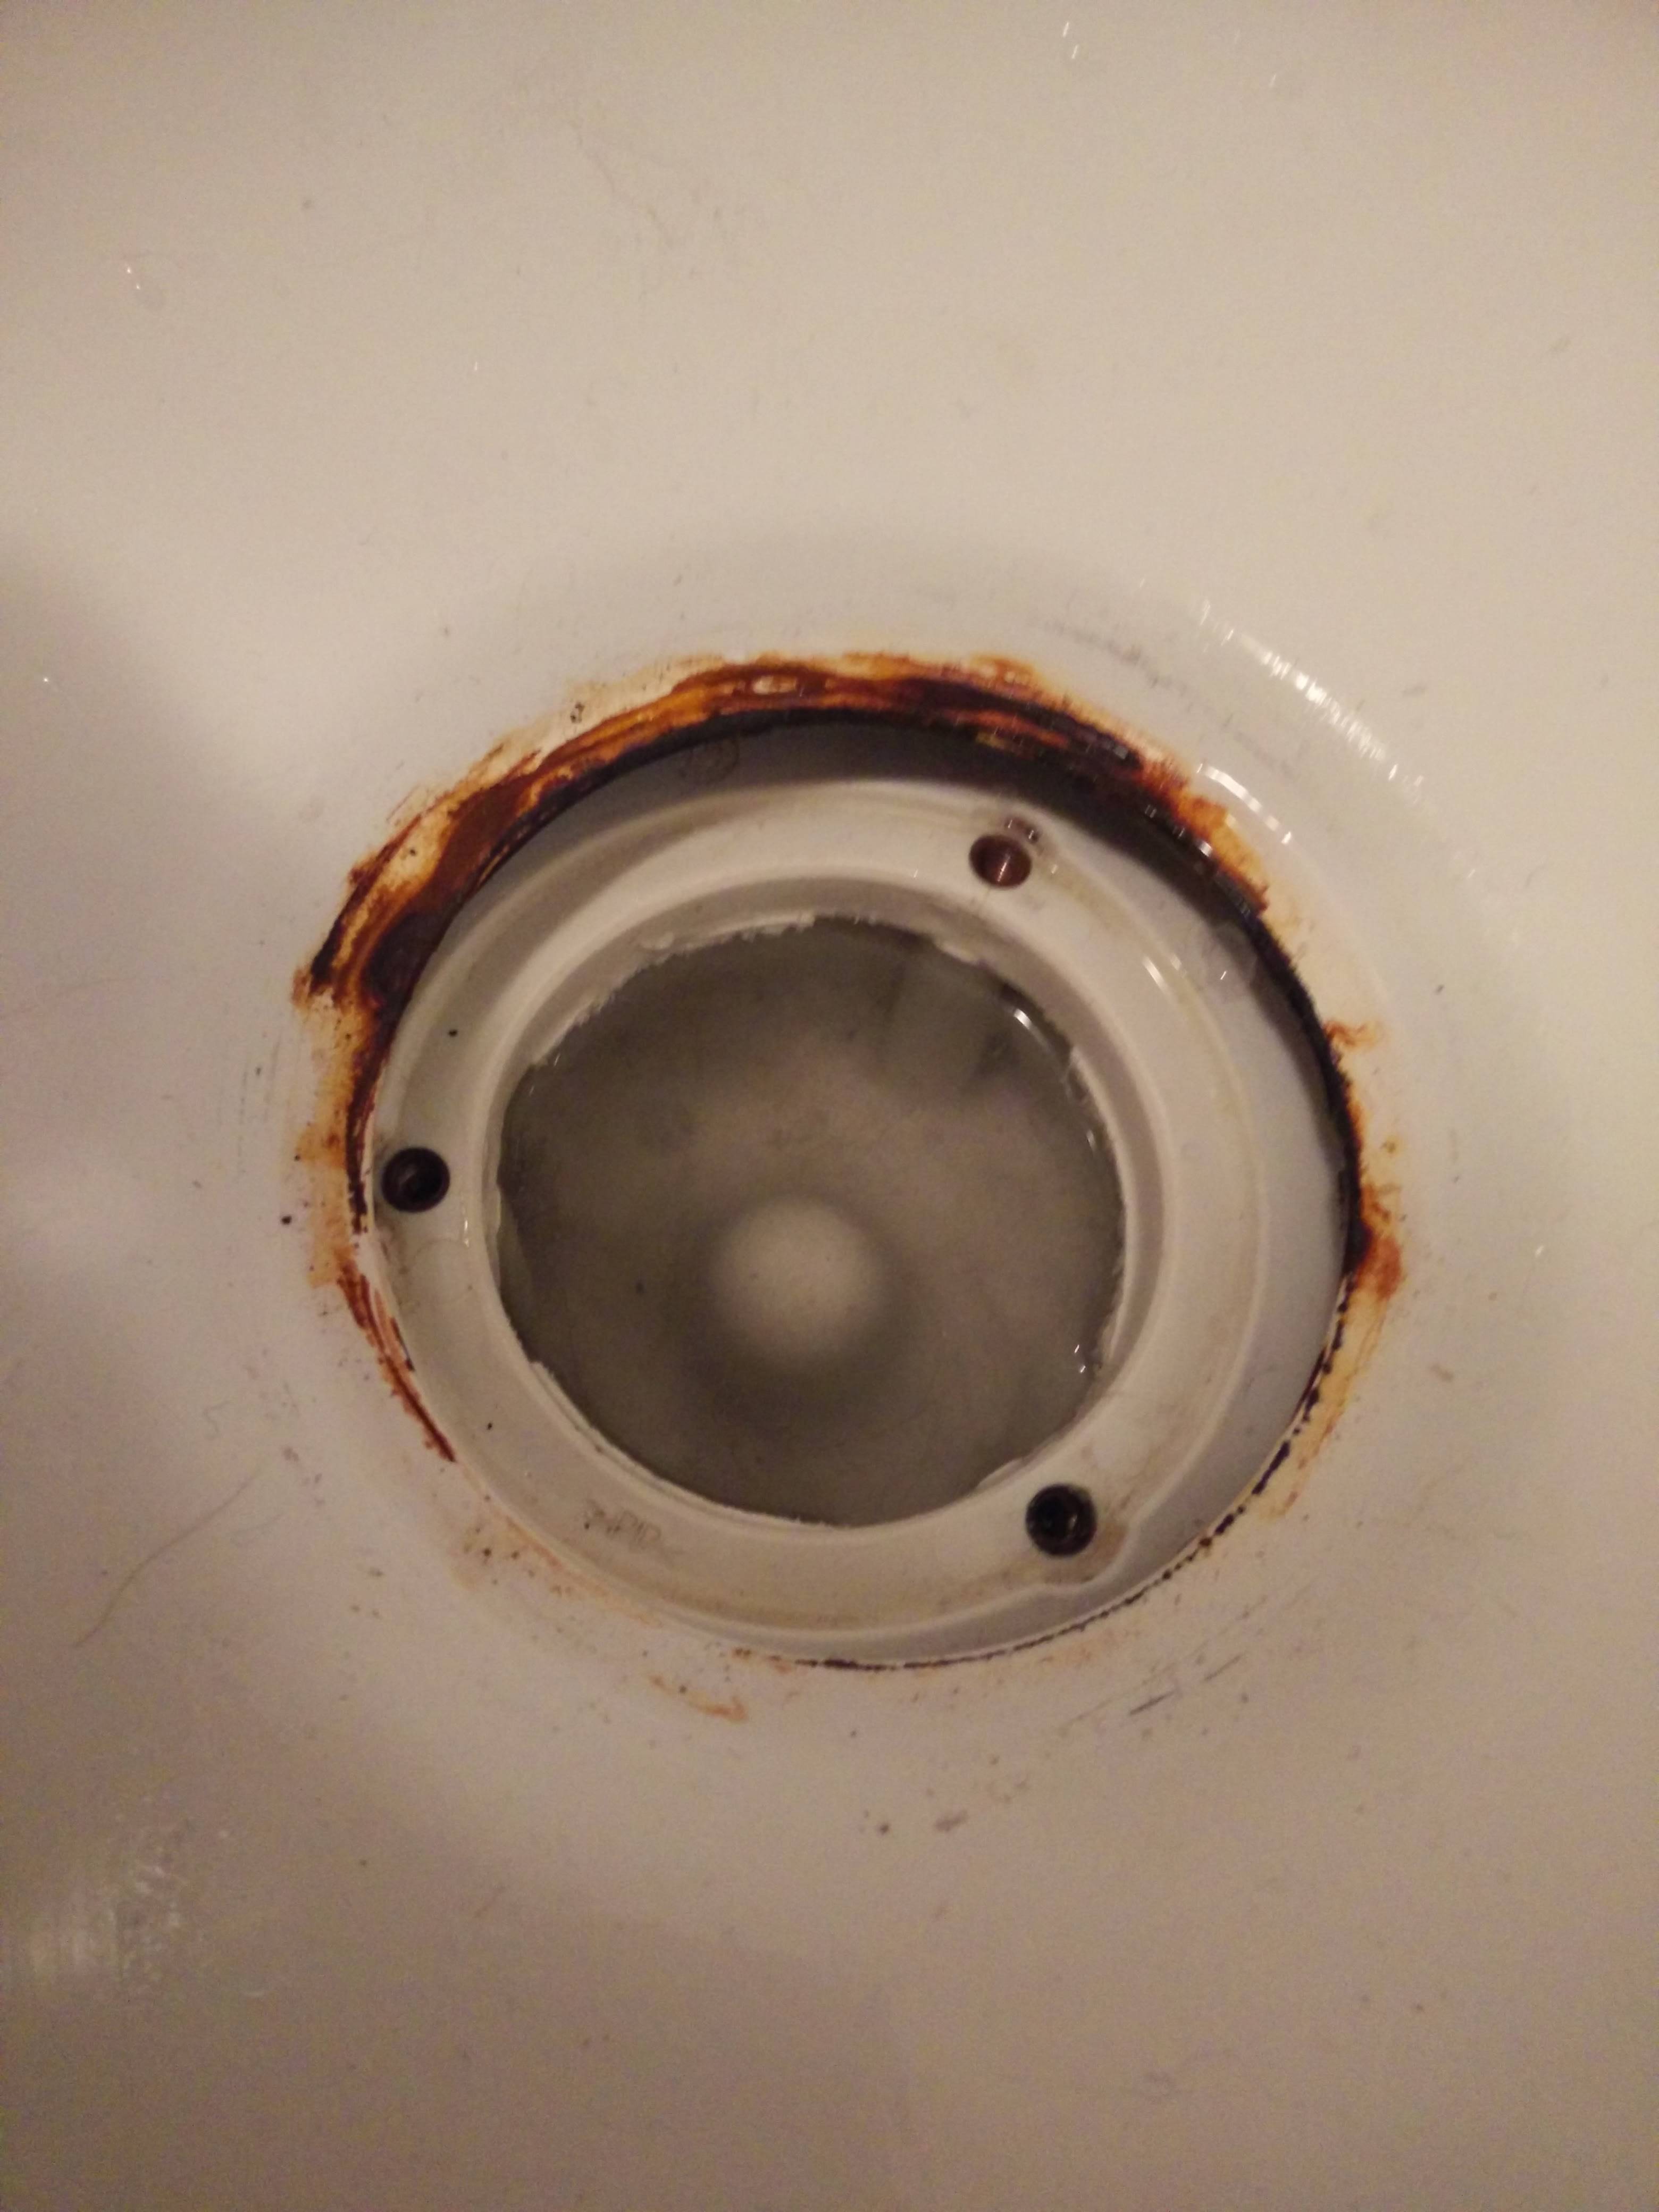 Hints for handling rust in shower drain - Home Improvement Stack ...